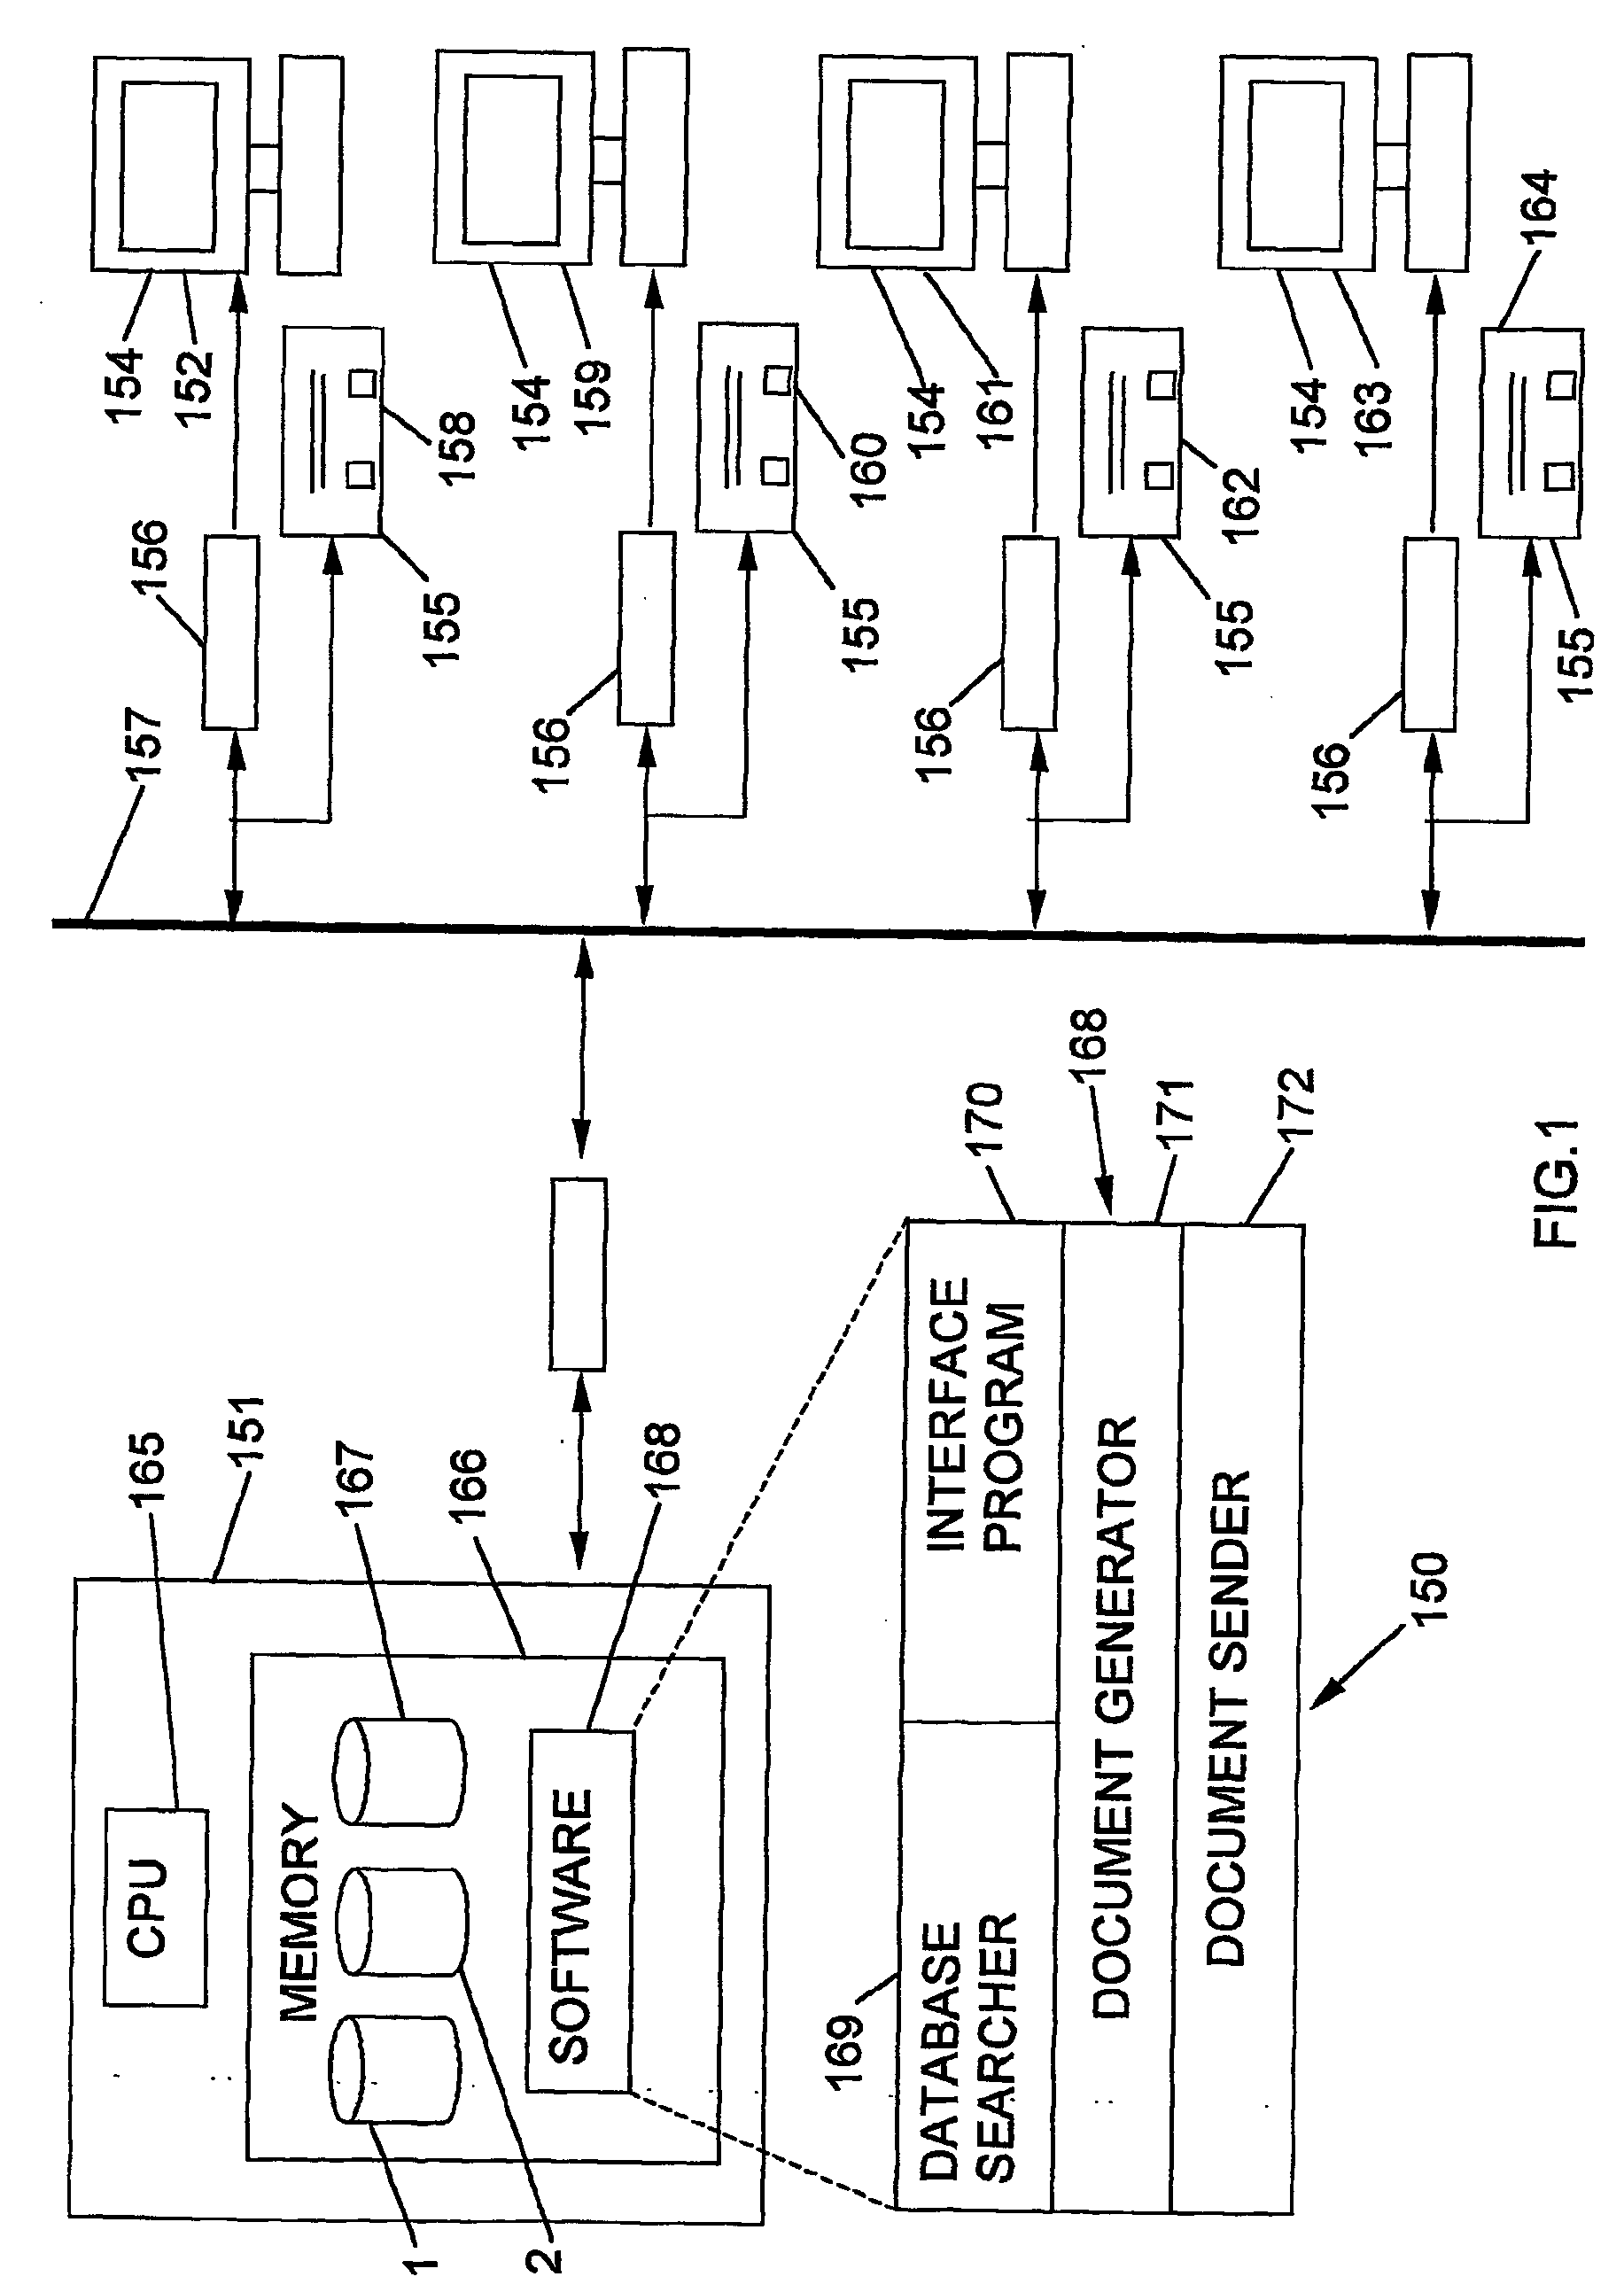 System and method of attracting and lodging pct national phase applications